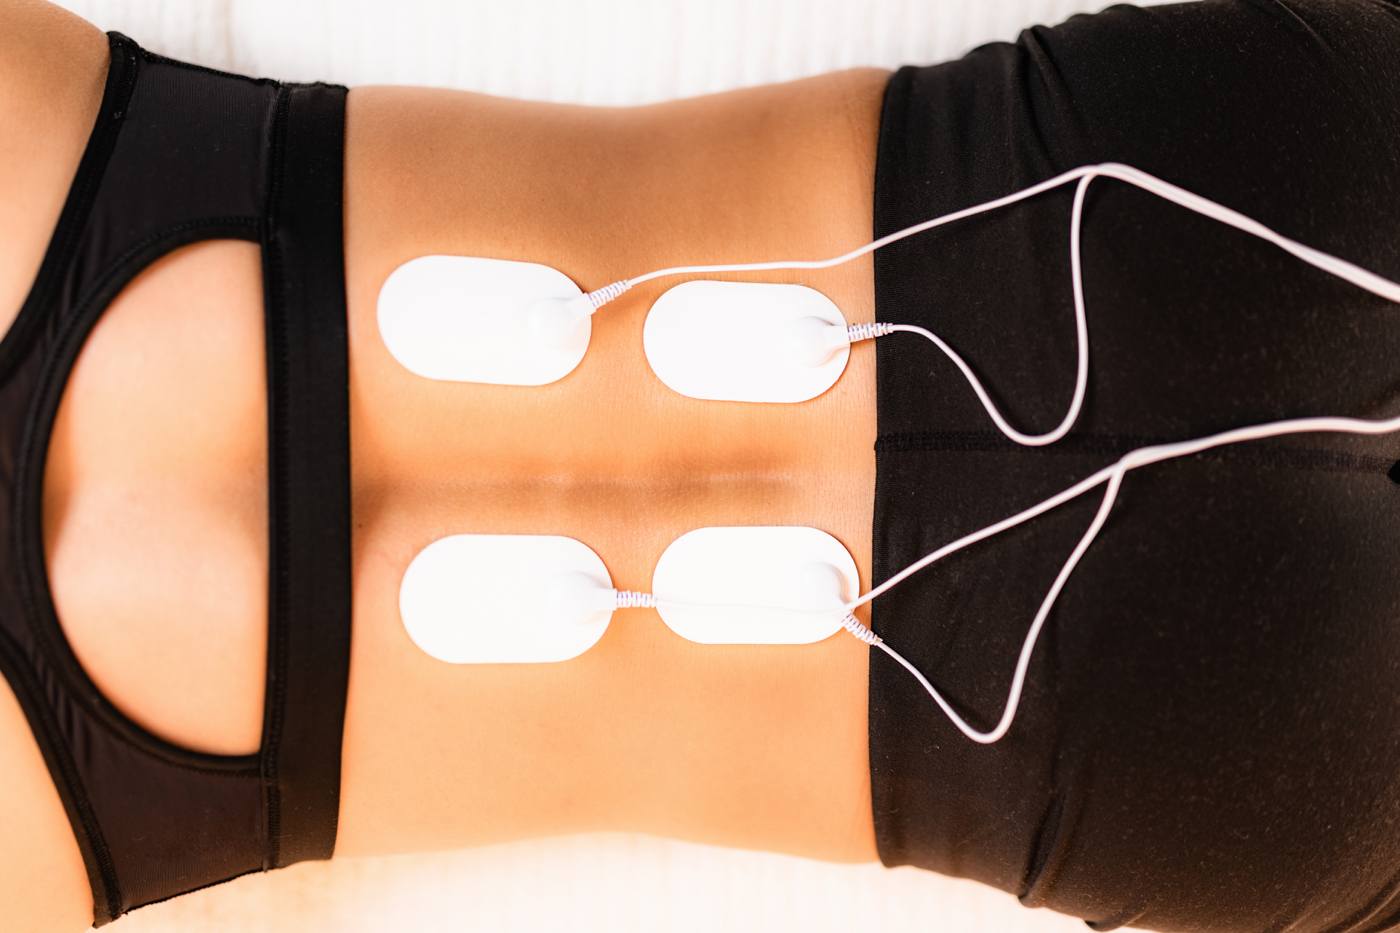 EMS Device electric muscle stimulation against back pain